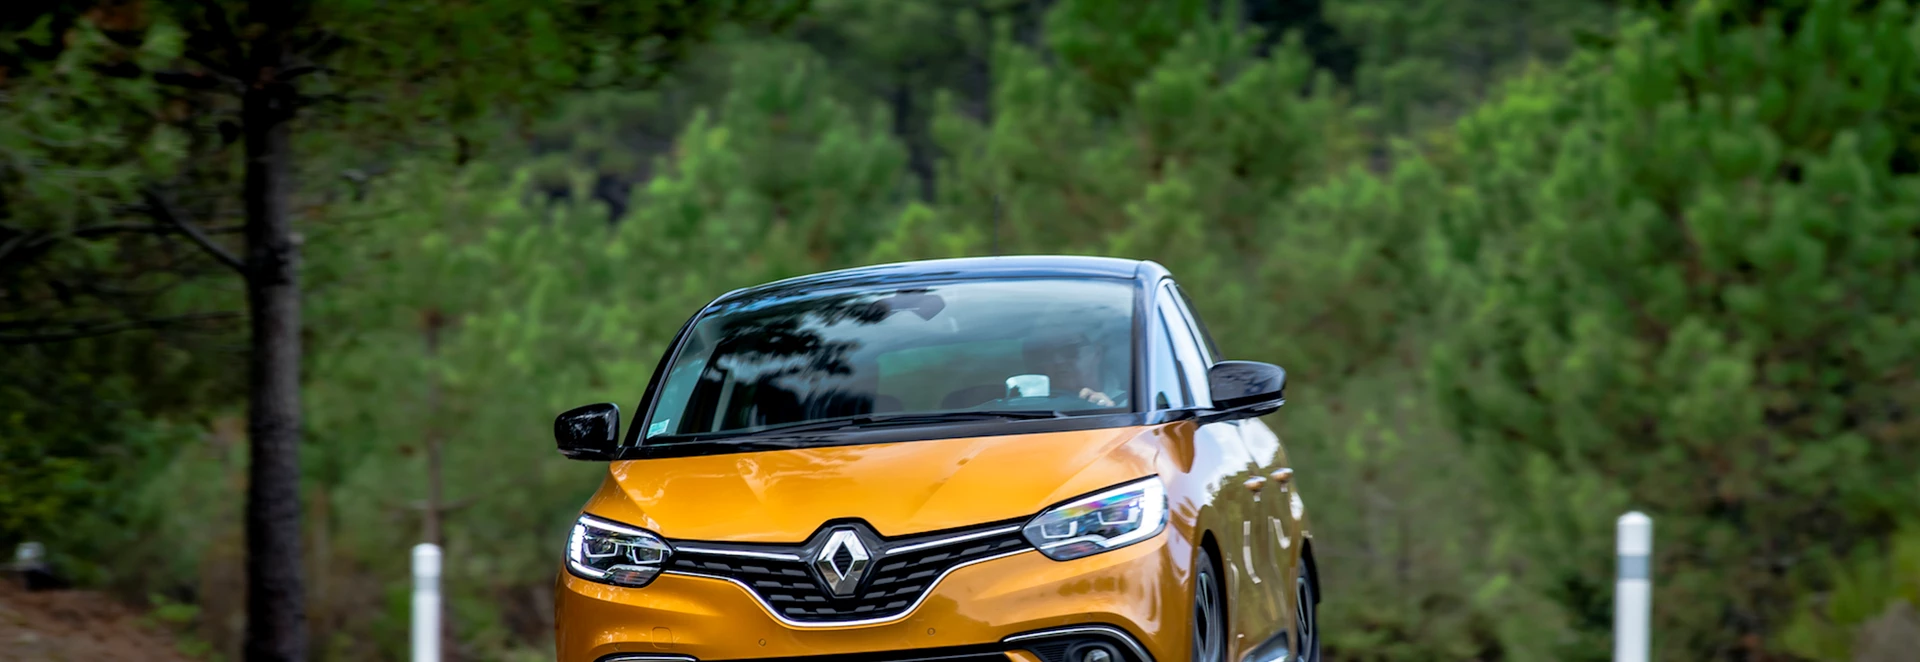 Renault Captur has a new look for 2017